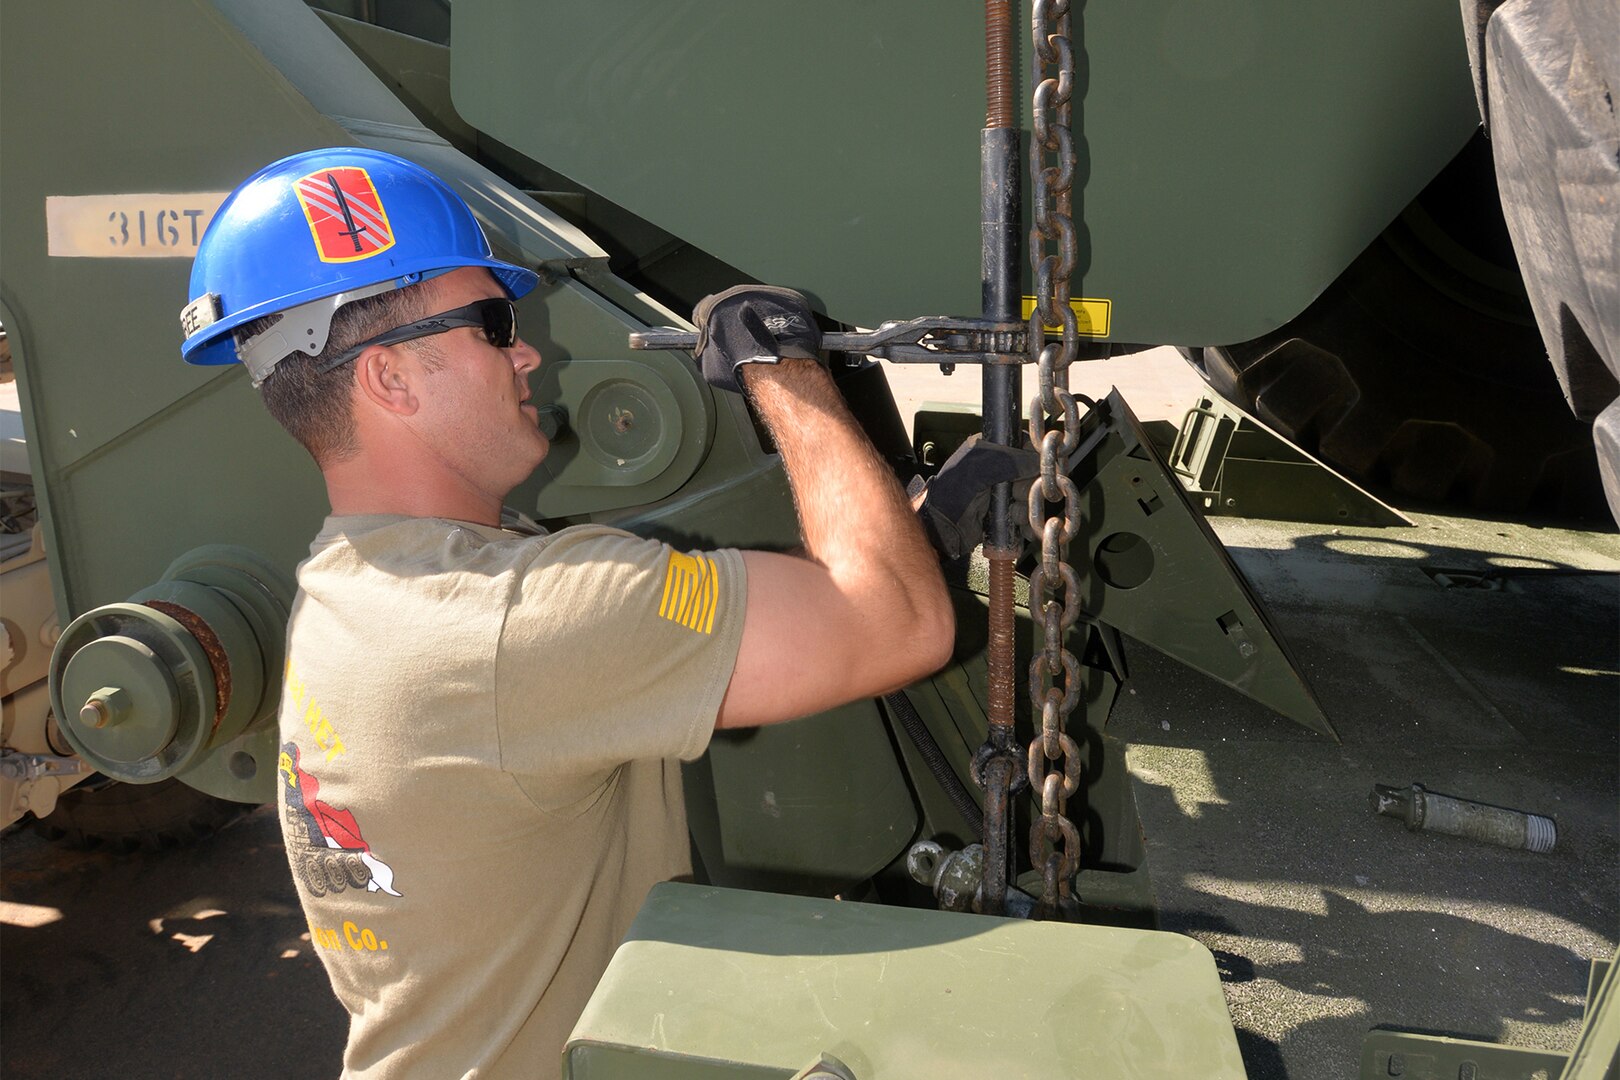 North Carolina National Guard Sgt. 1st Class Derek Winfree, a truck driver assigned to the 1452nd Combat Heavy Equipment Transporter Transportation Company, adjusts a chain hitch helping move heavy equipment from training sites across Fort Bragg, North Carolina, Oct. 15, 2020, in support of the 82nd Airborne Division.